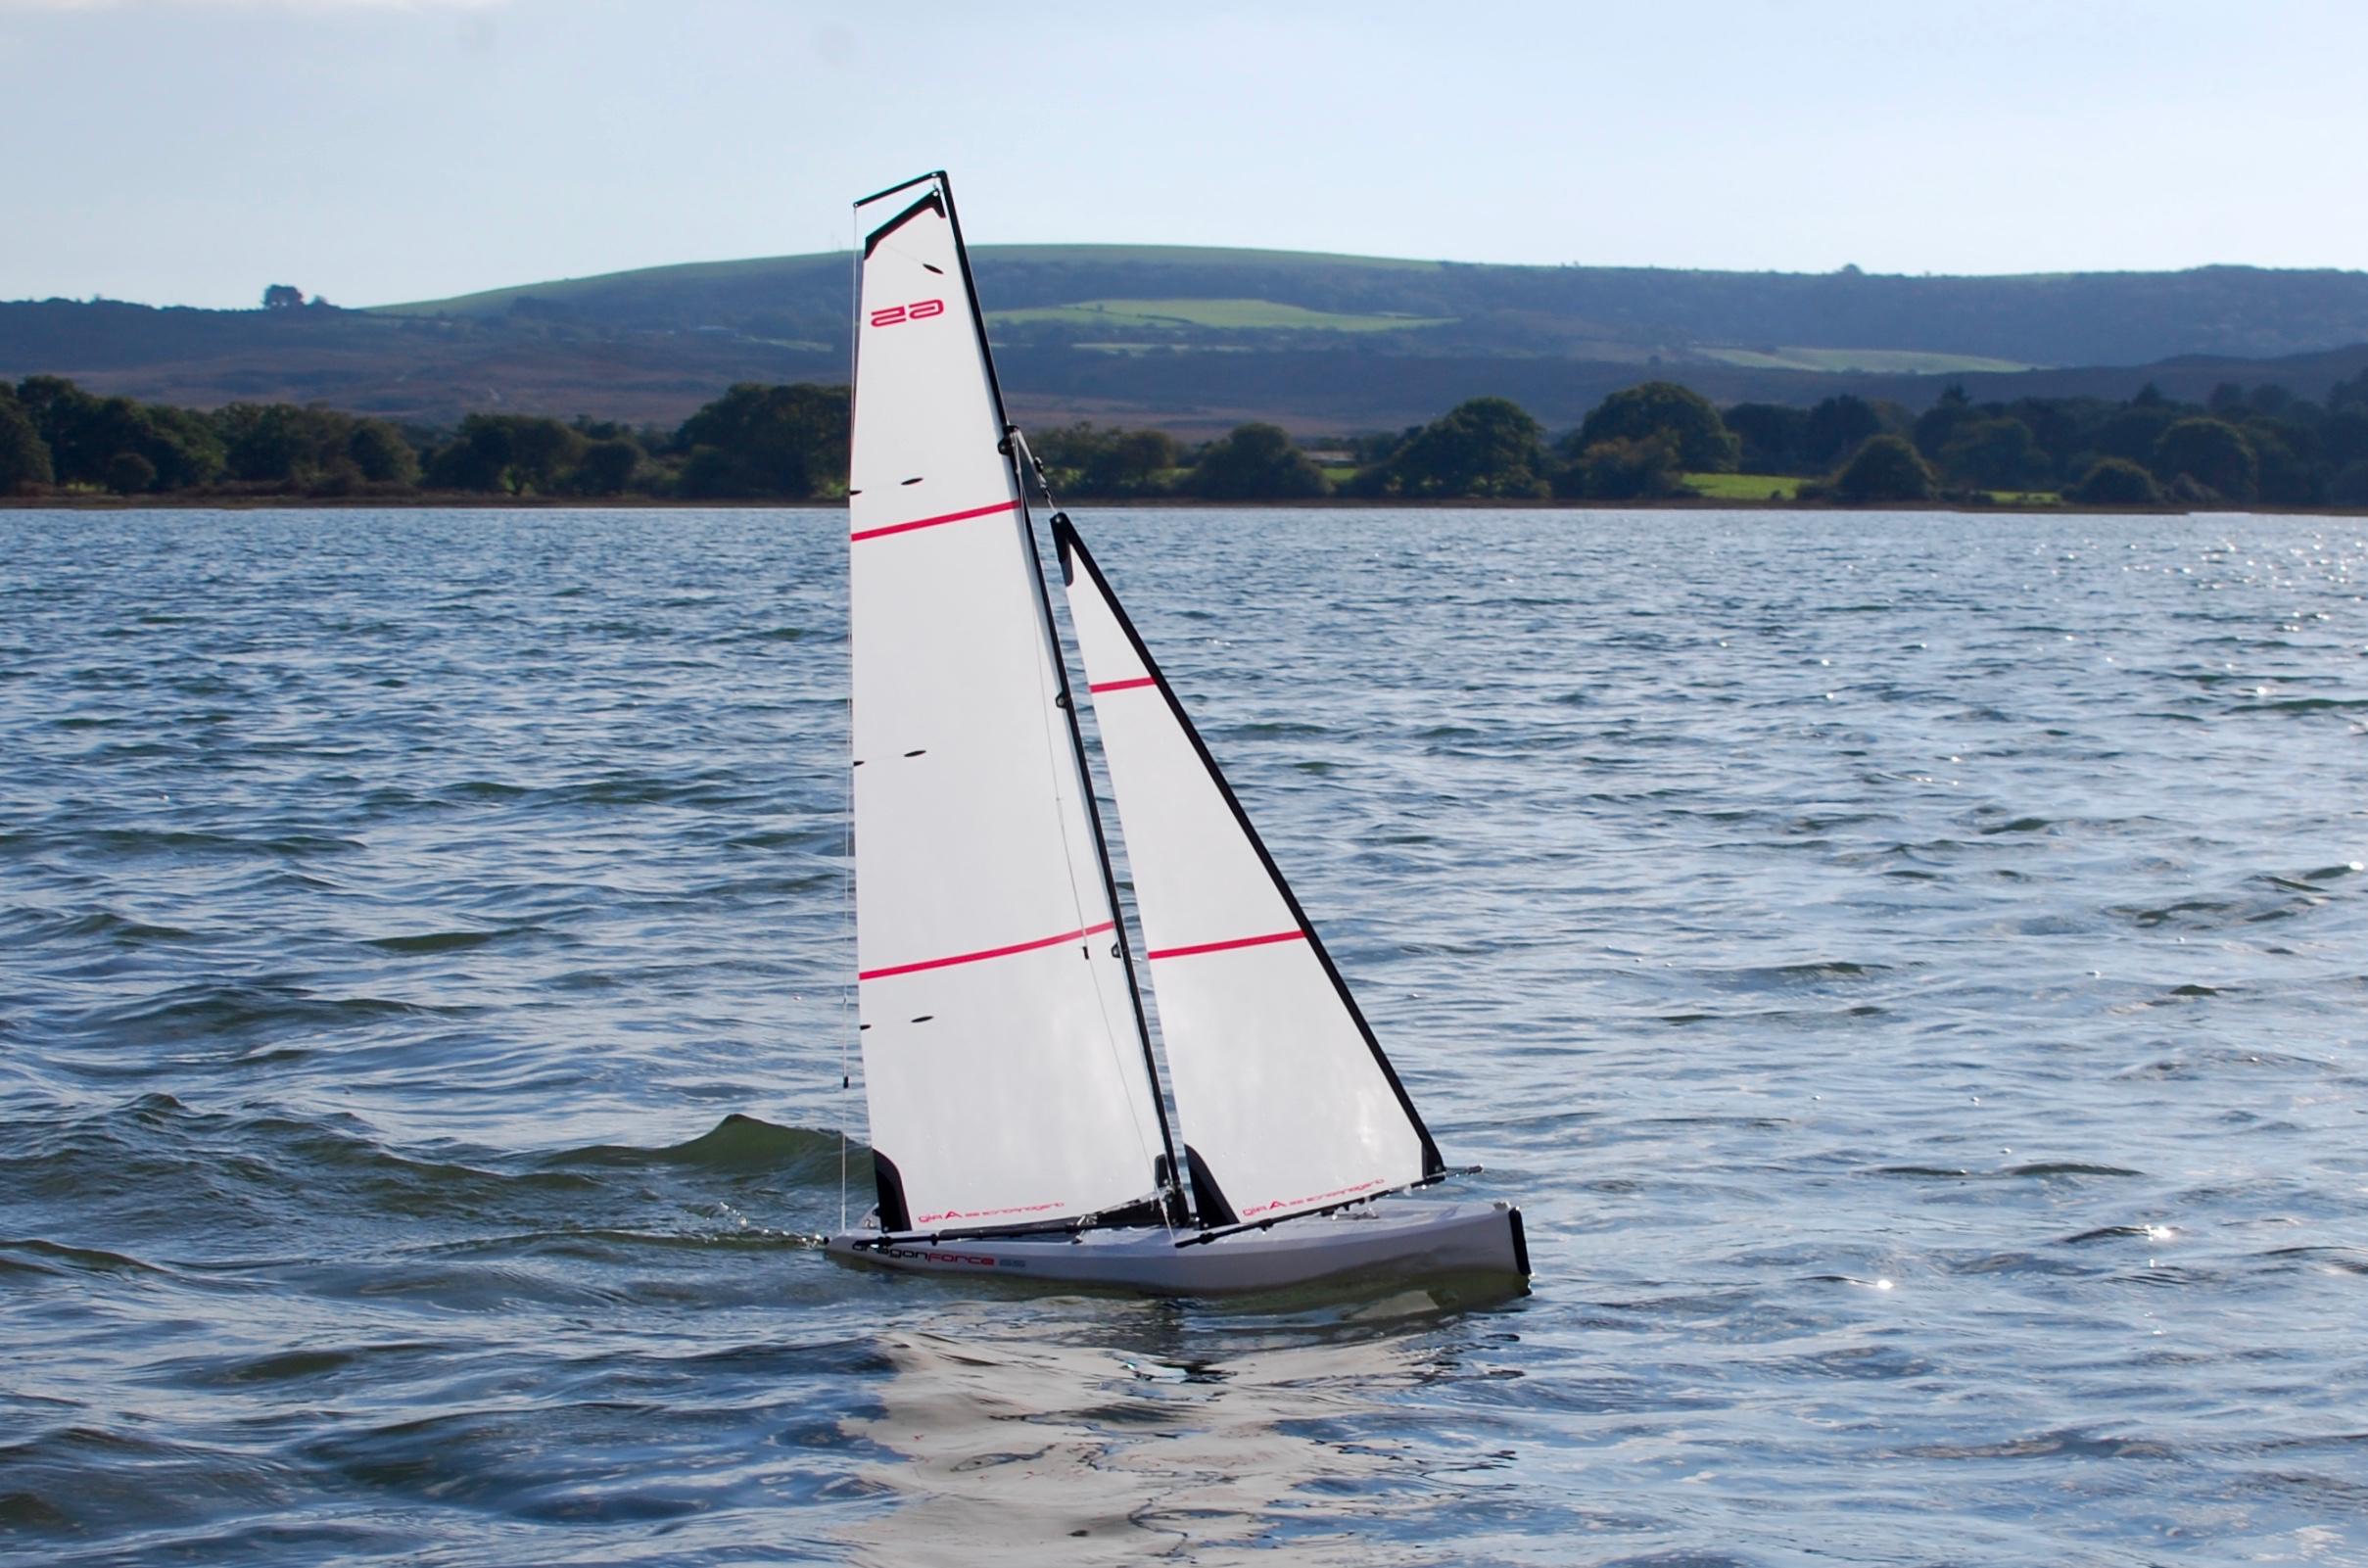 Dragon 65 Model Yacht: Dragon 65: A Top-Performing Model Yacht for Experienced Sailors